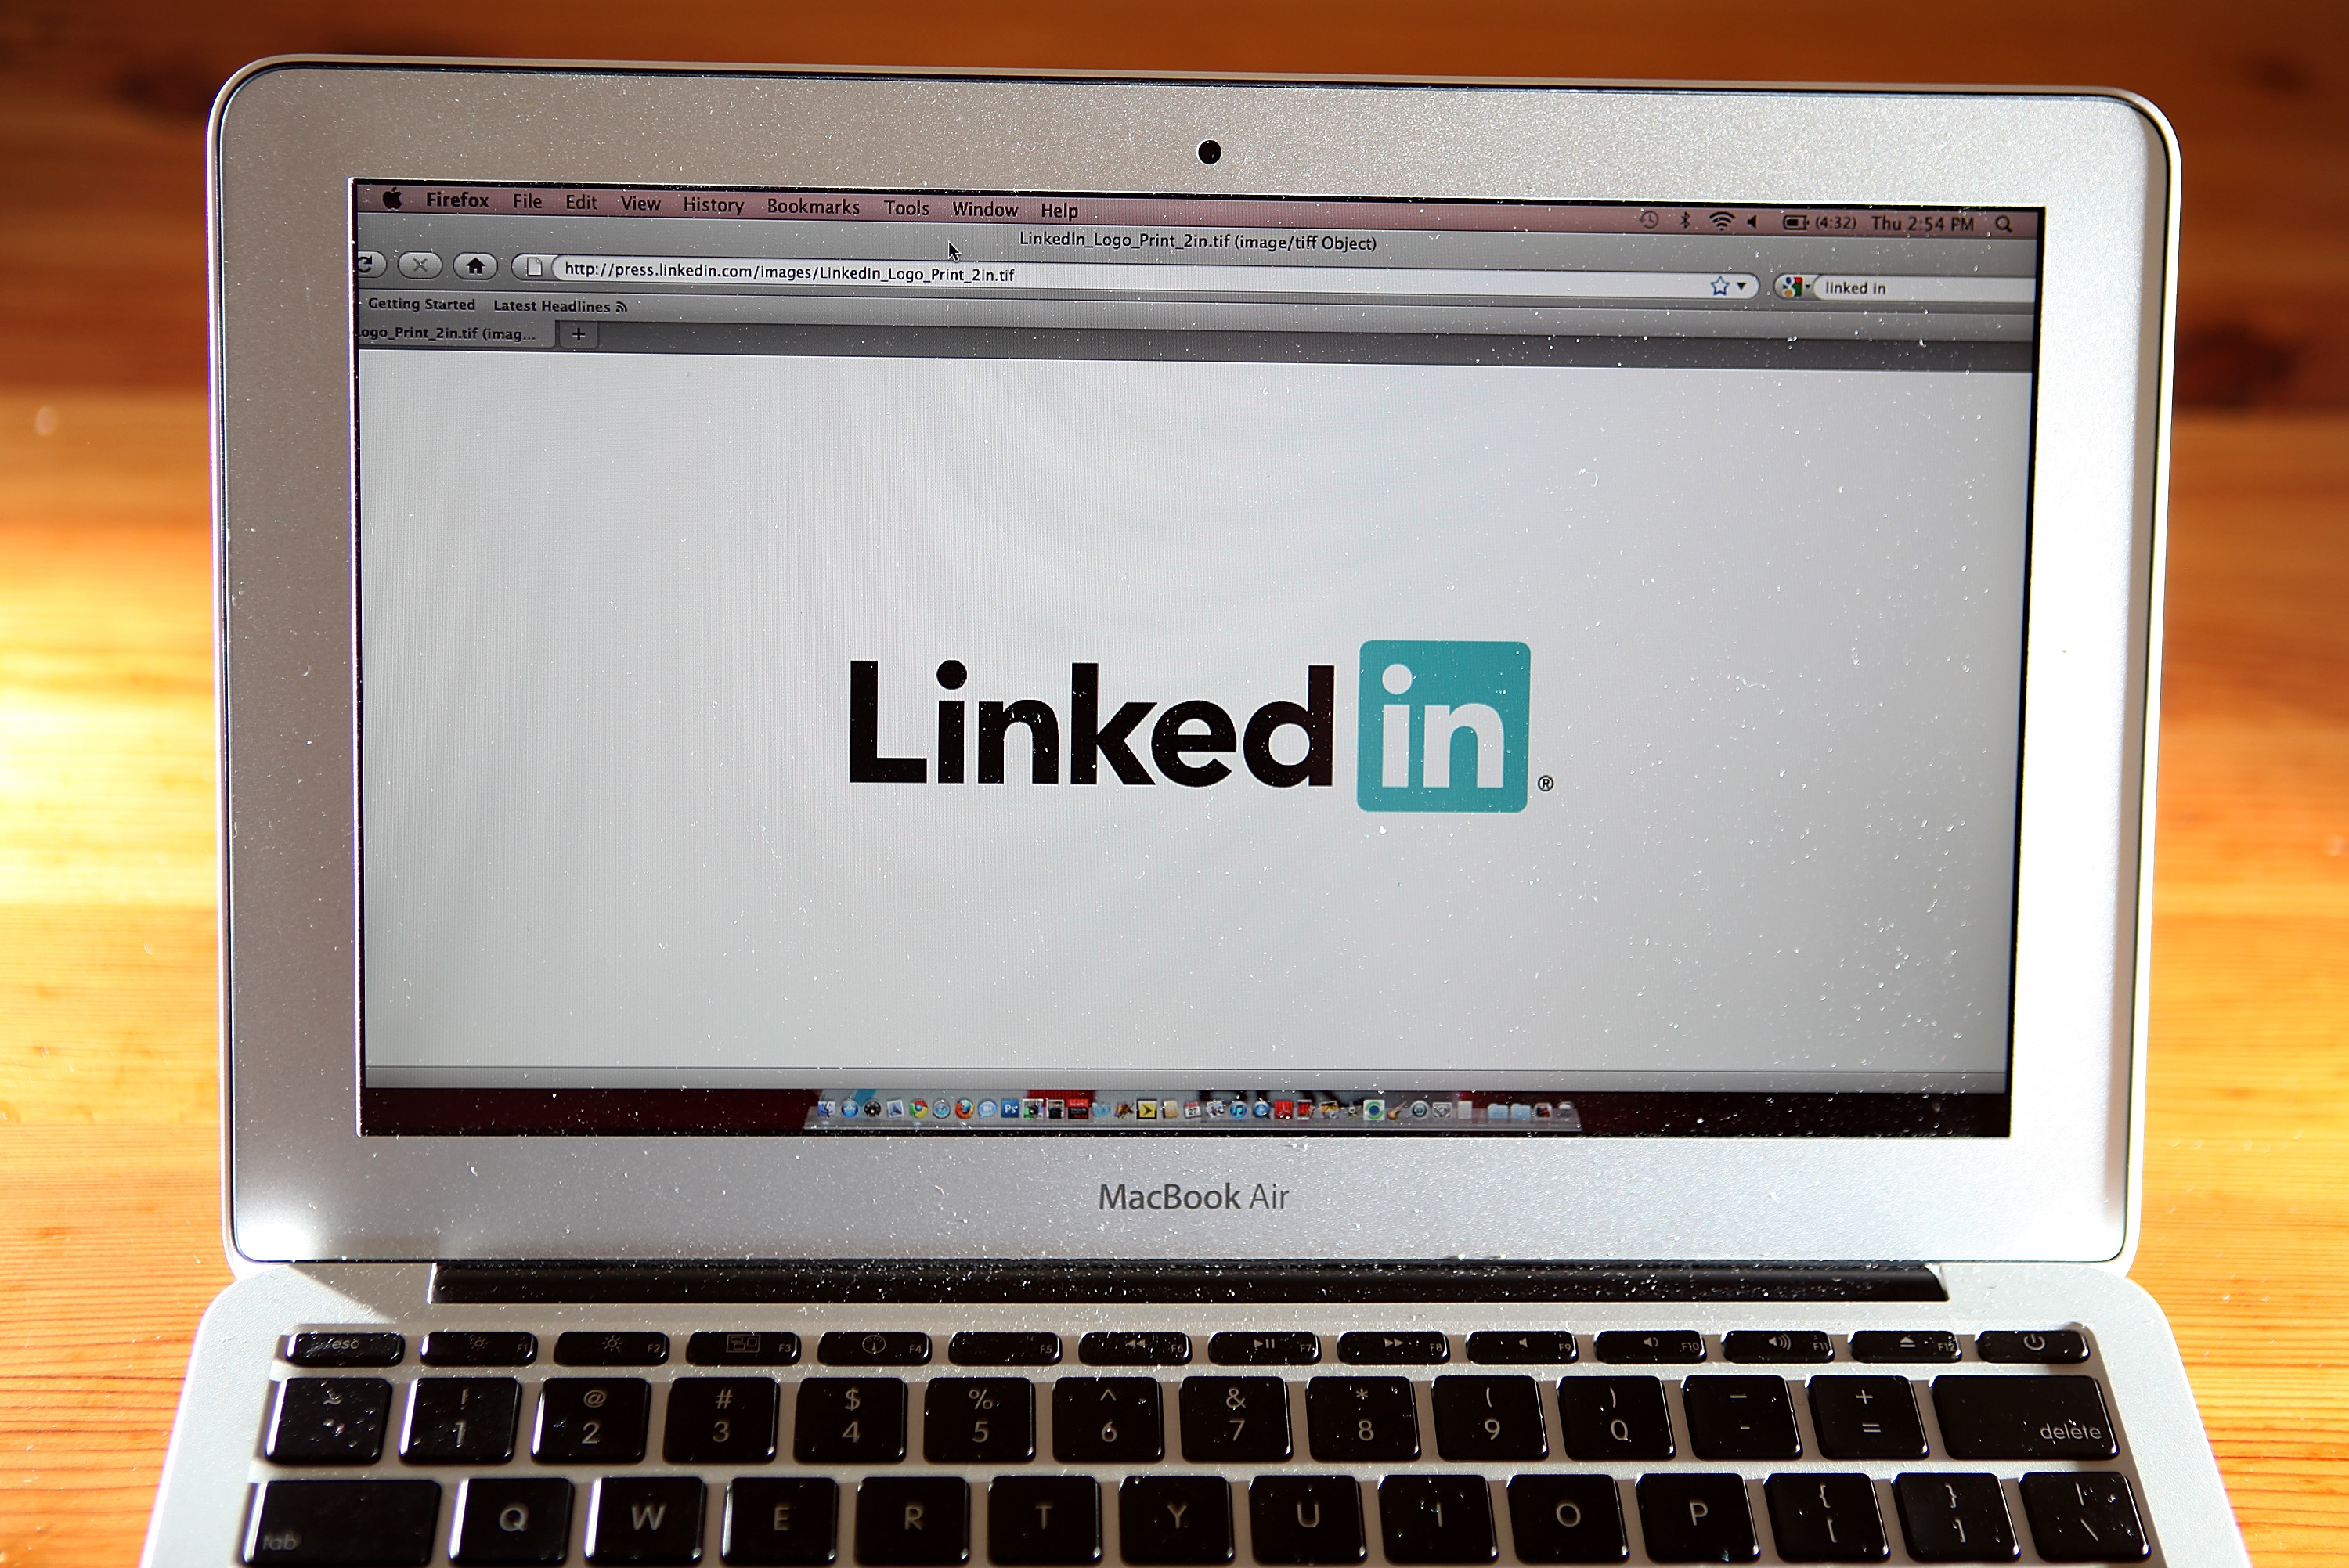 LinkedIn Corp. To File For IPO